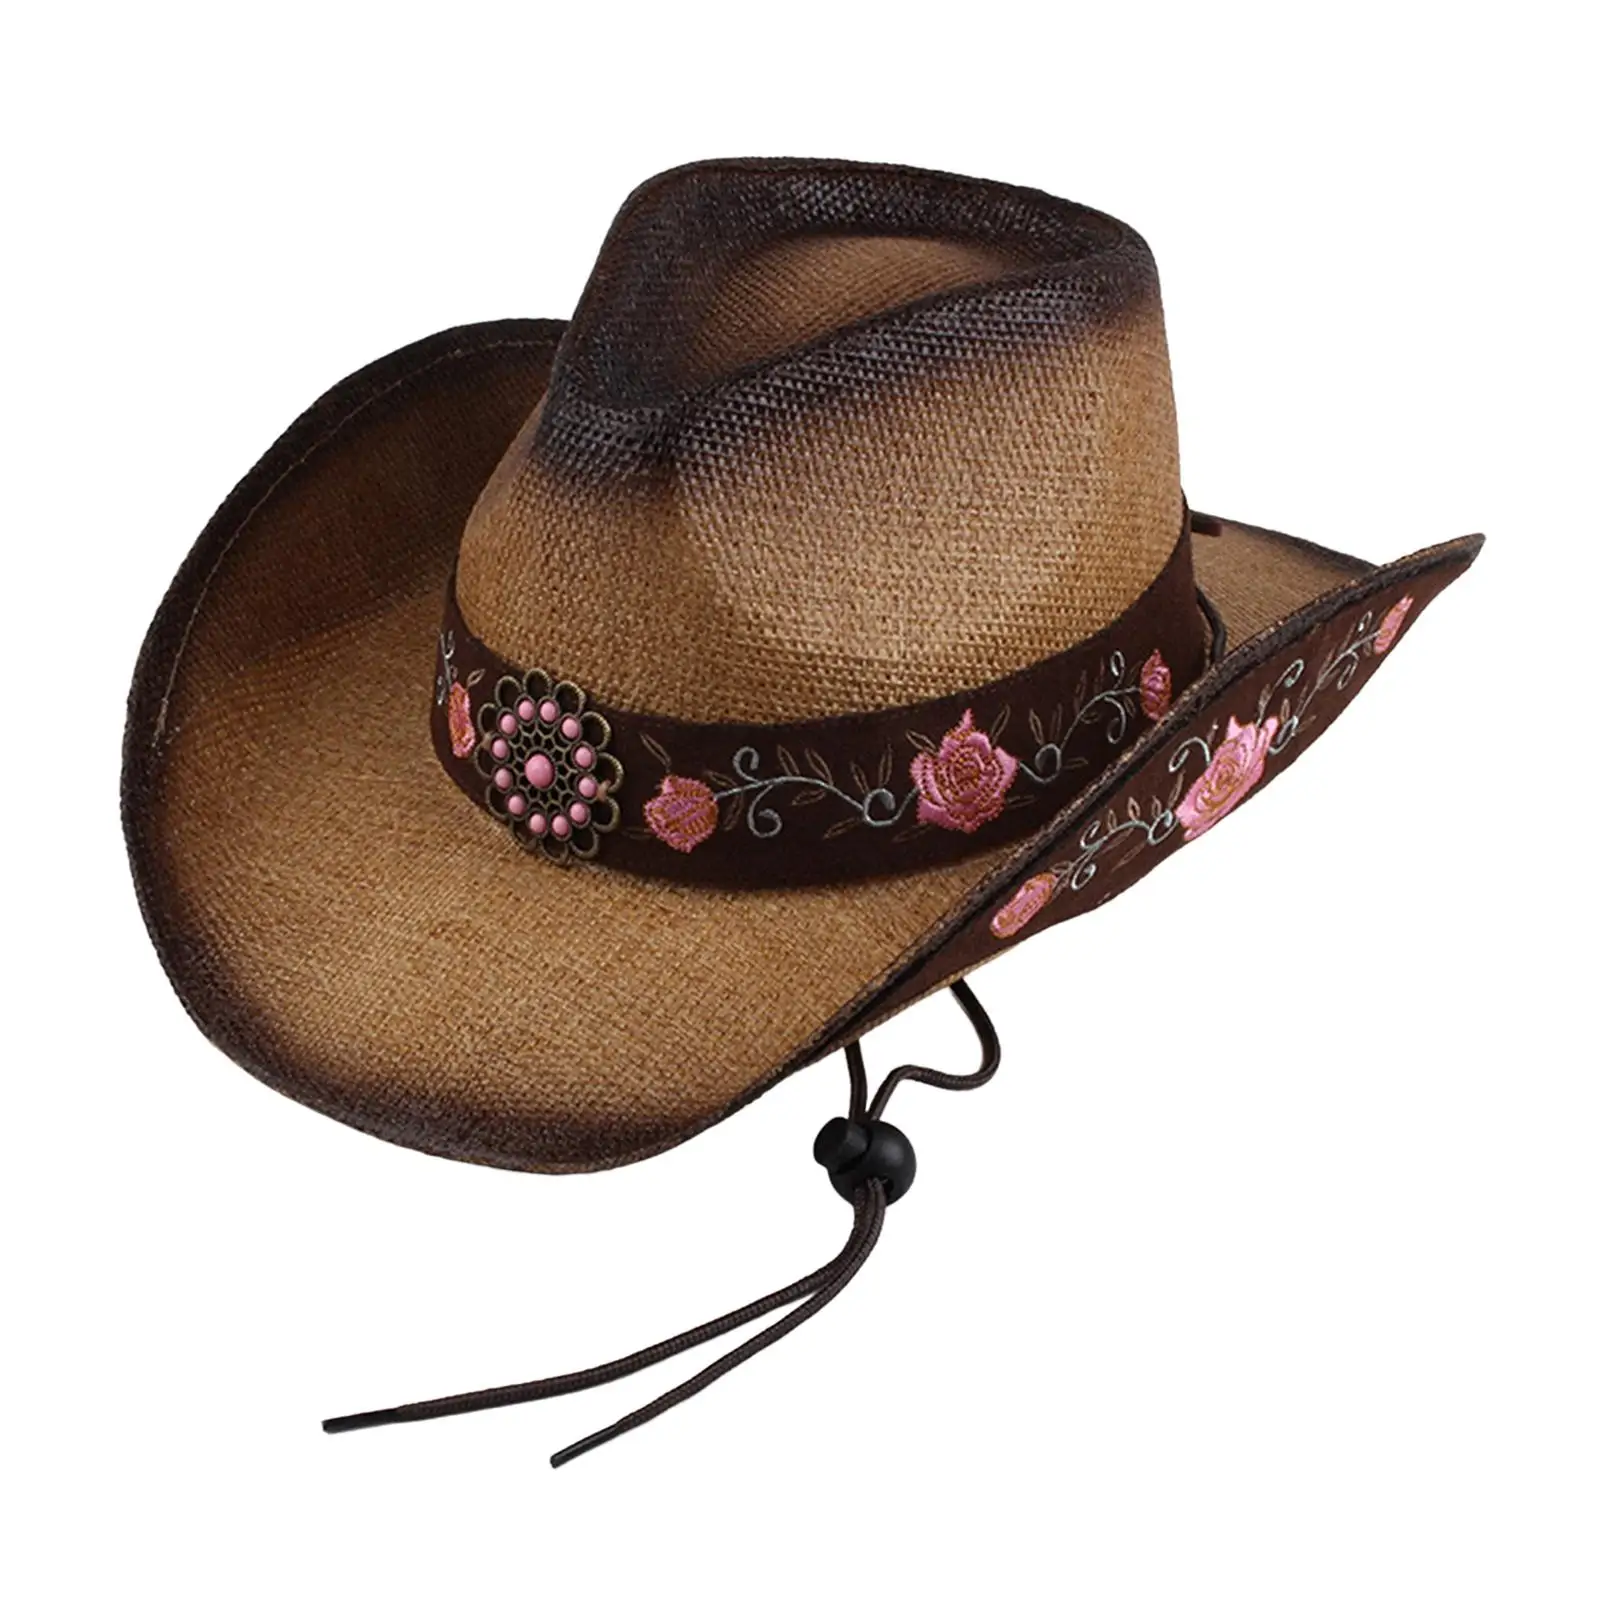 Western Cowboy Hat Costume Straw Casual Jazz Hat Fedoras Caps Sun Hats Cowgirl Cap for Hiking Dress up Adults Party Fancy Dress